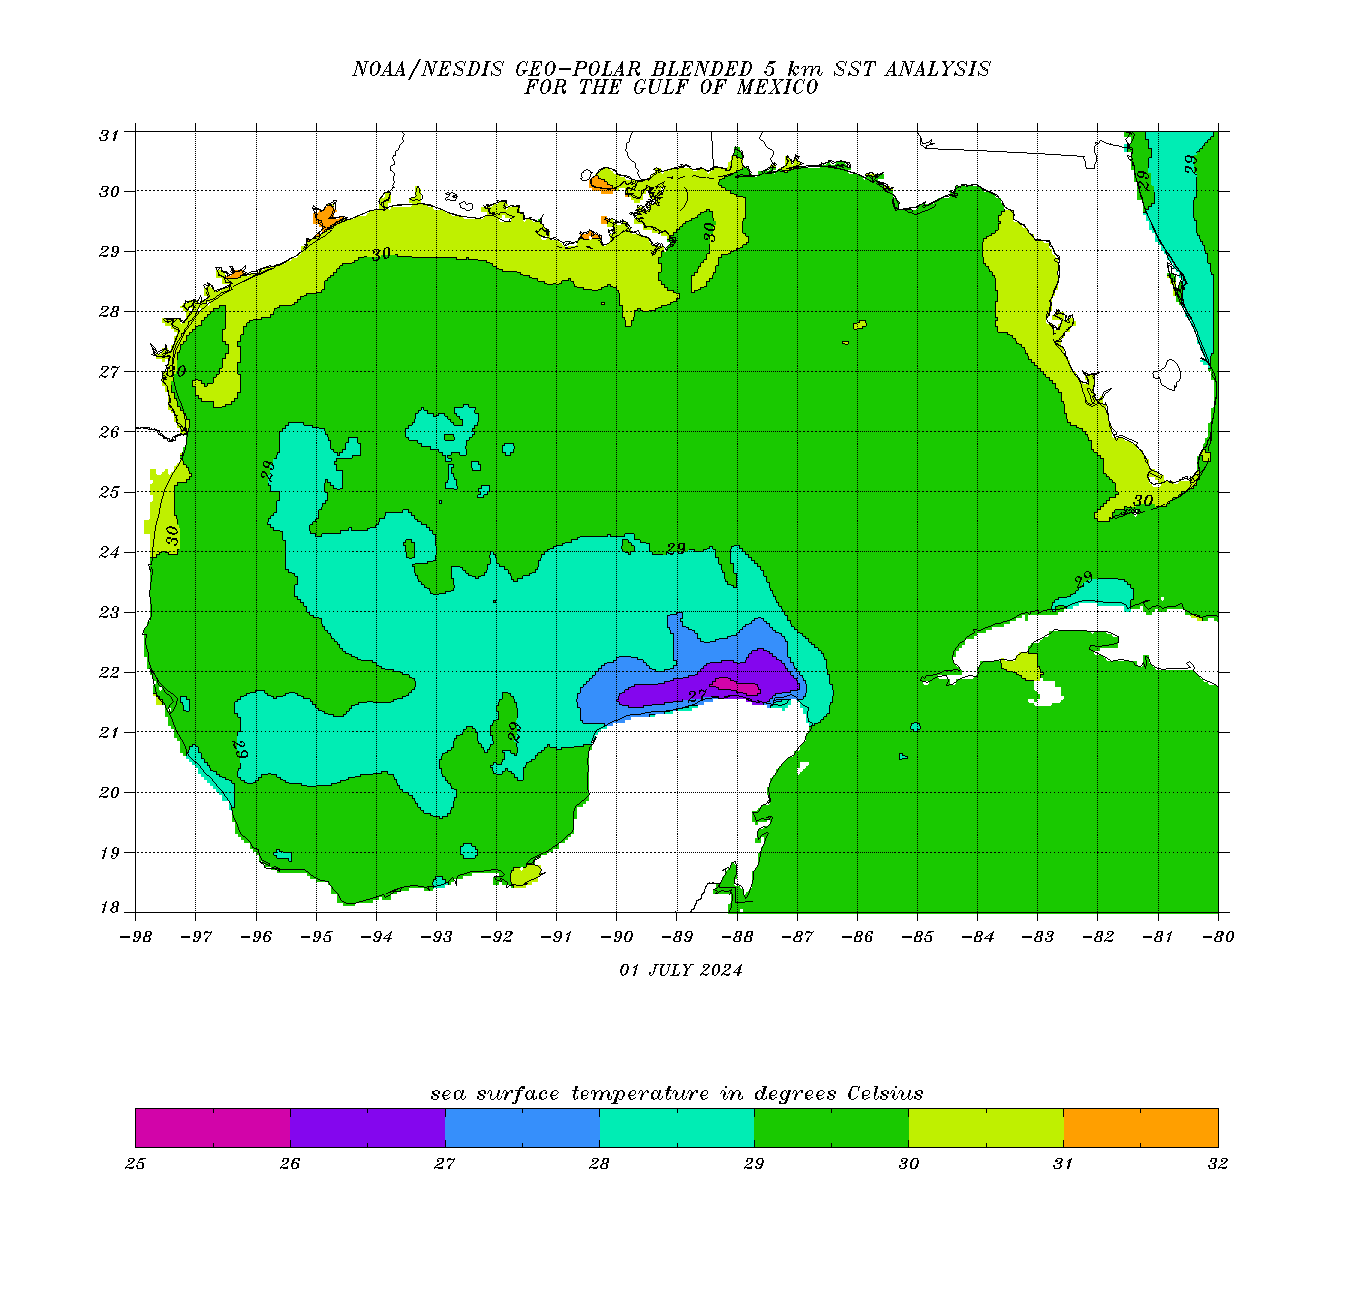 Current Gulf Of Mexico Water Temperature Map Global Sea Temperatures